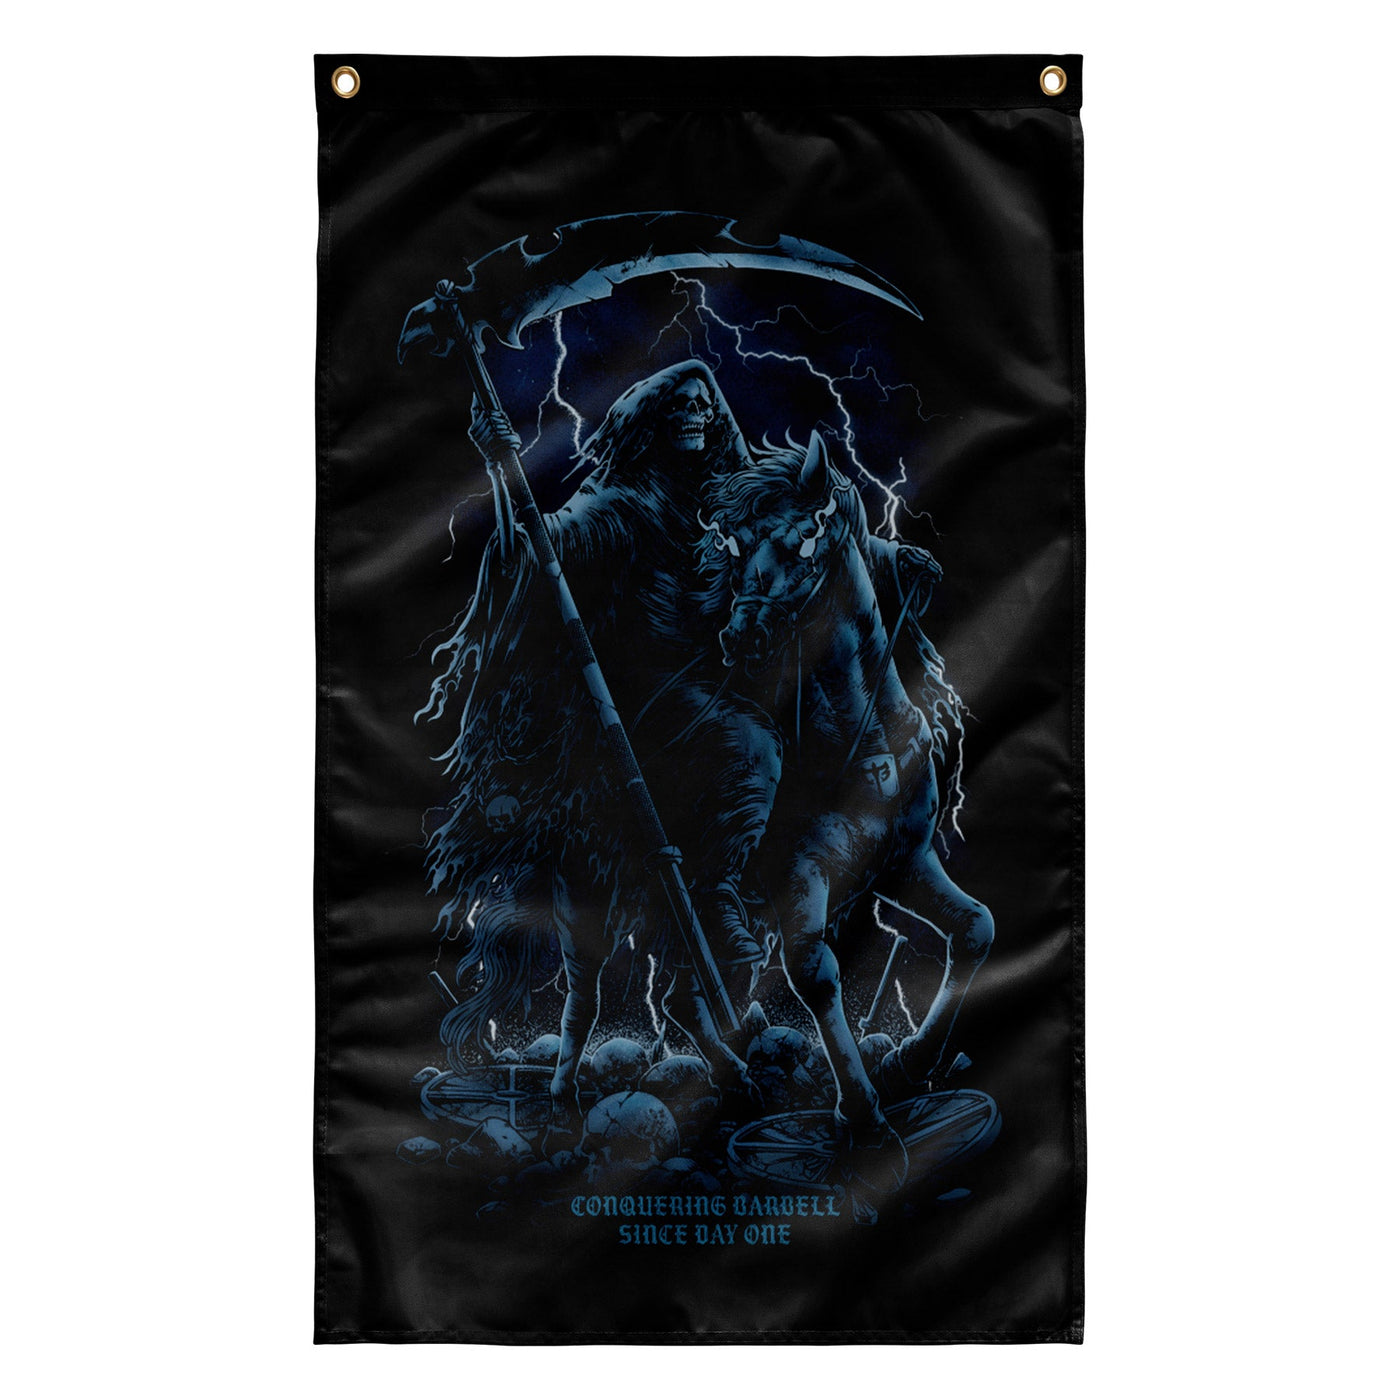 The Reaper - 3' x 5' Polyester Flag - Conquering Barbell